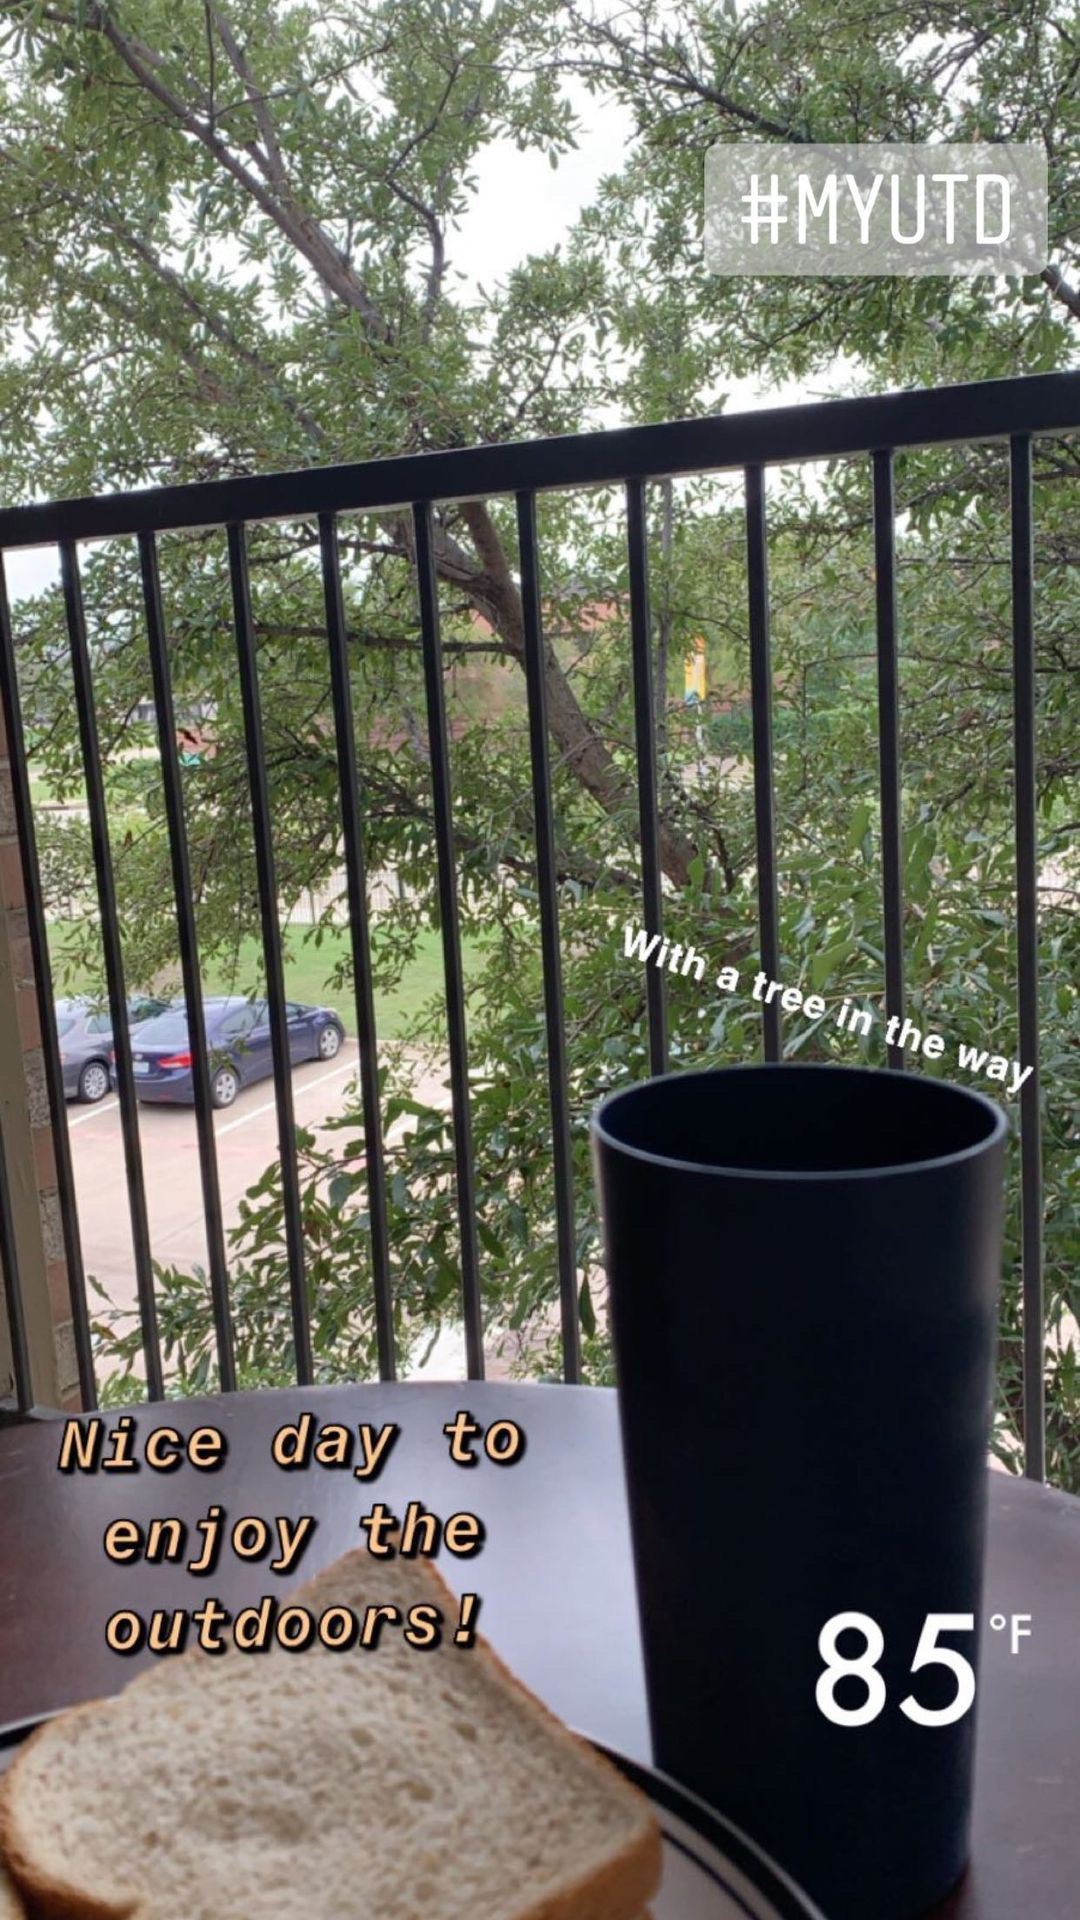 View from seated at a table on a balcony. A sandwich on a plate and a cup are on the table. There's a tree with green leaves right in front of the balcony. Parking lot with two cars can be seen past the tree.